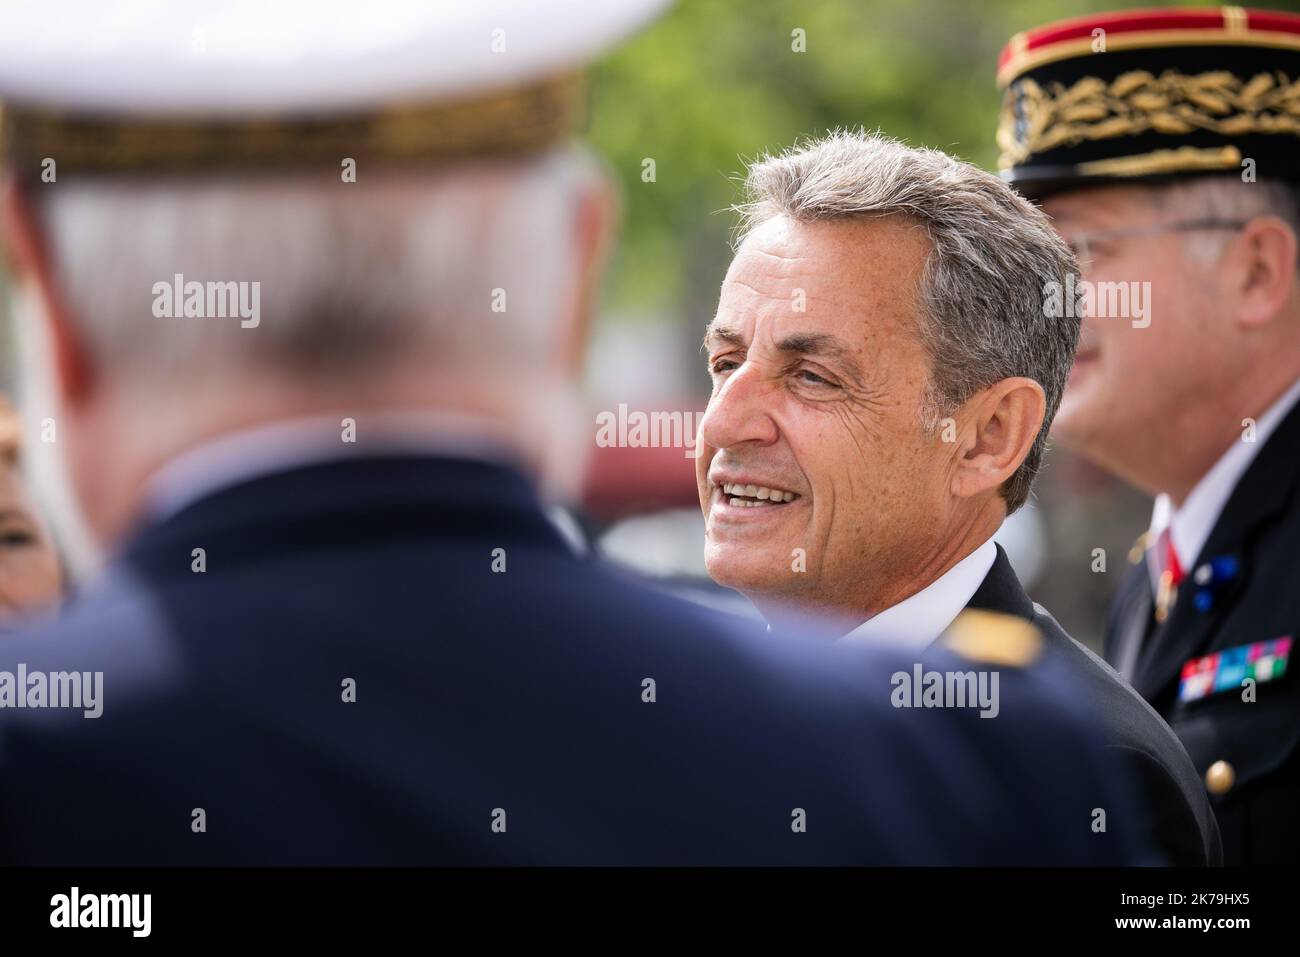 Nicolas Sarkozy, anciPool/Maxpppen president de la republique -   France, may 8th 2020 - commemoration ceremony of the armistice of May 8, 1945 during the confinement in France linked to the covid19 Stock Photo